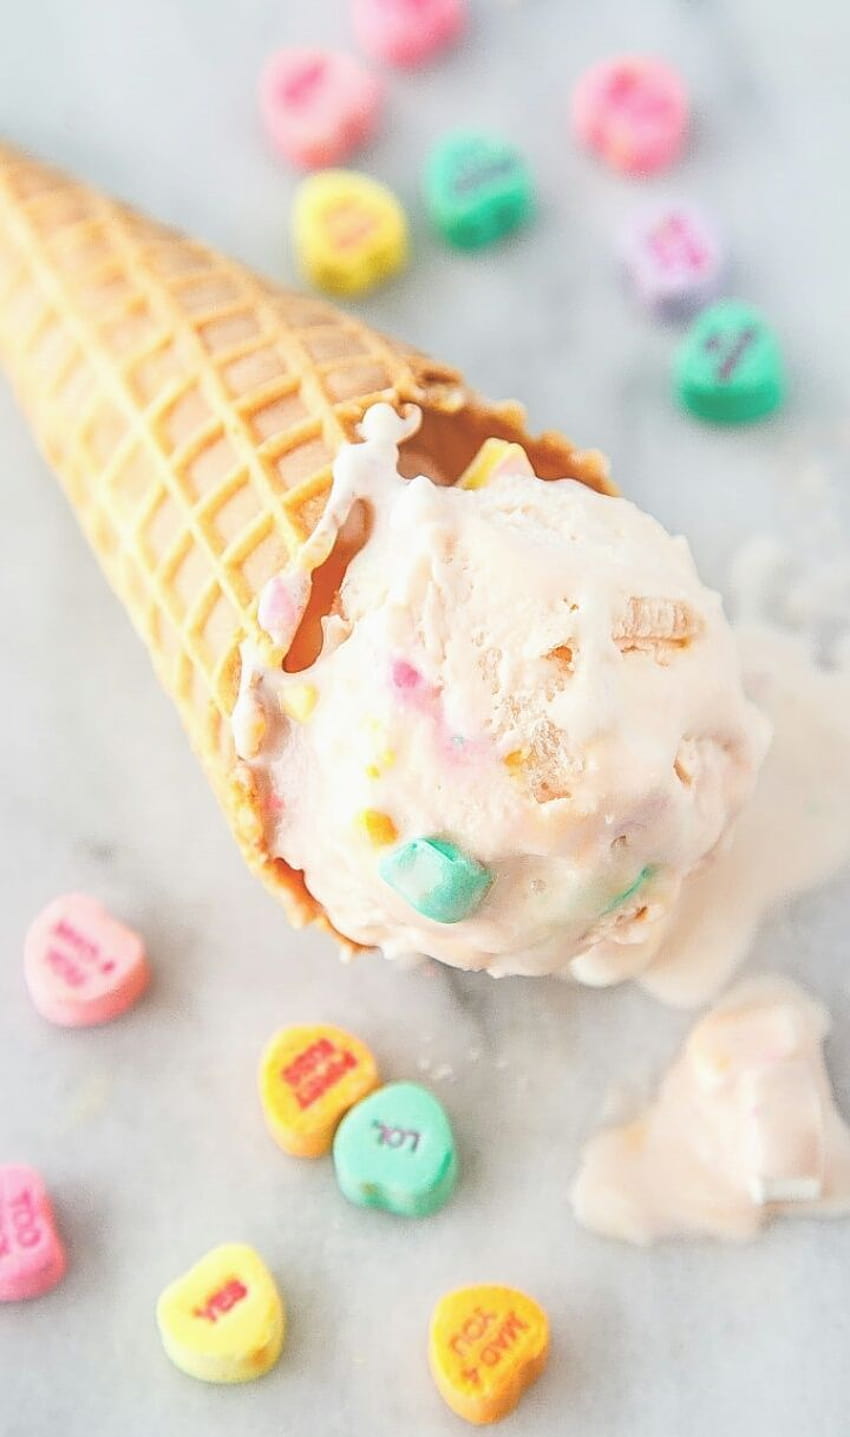 Ice cream,candy, decor, decoration, delicious, dessert, food, ice, pastel, pink, style, sugar, sweet, sweets, we heart it, iphone, pastel color, beautiful food, pink ice cream, pastel food, beauty food, sweet food HD phone wallpaper